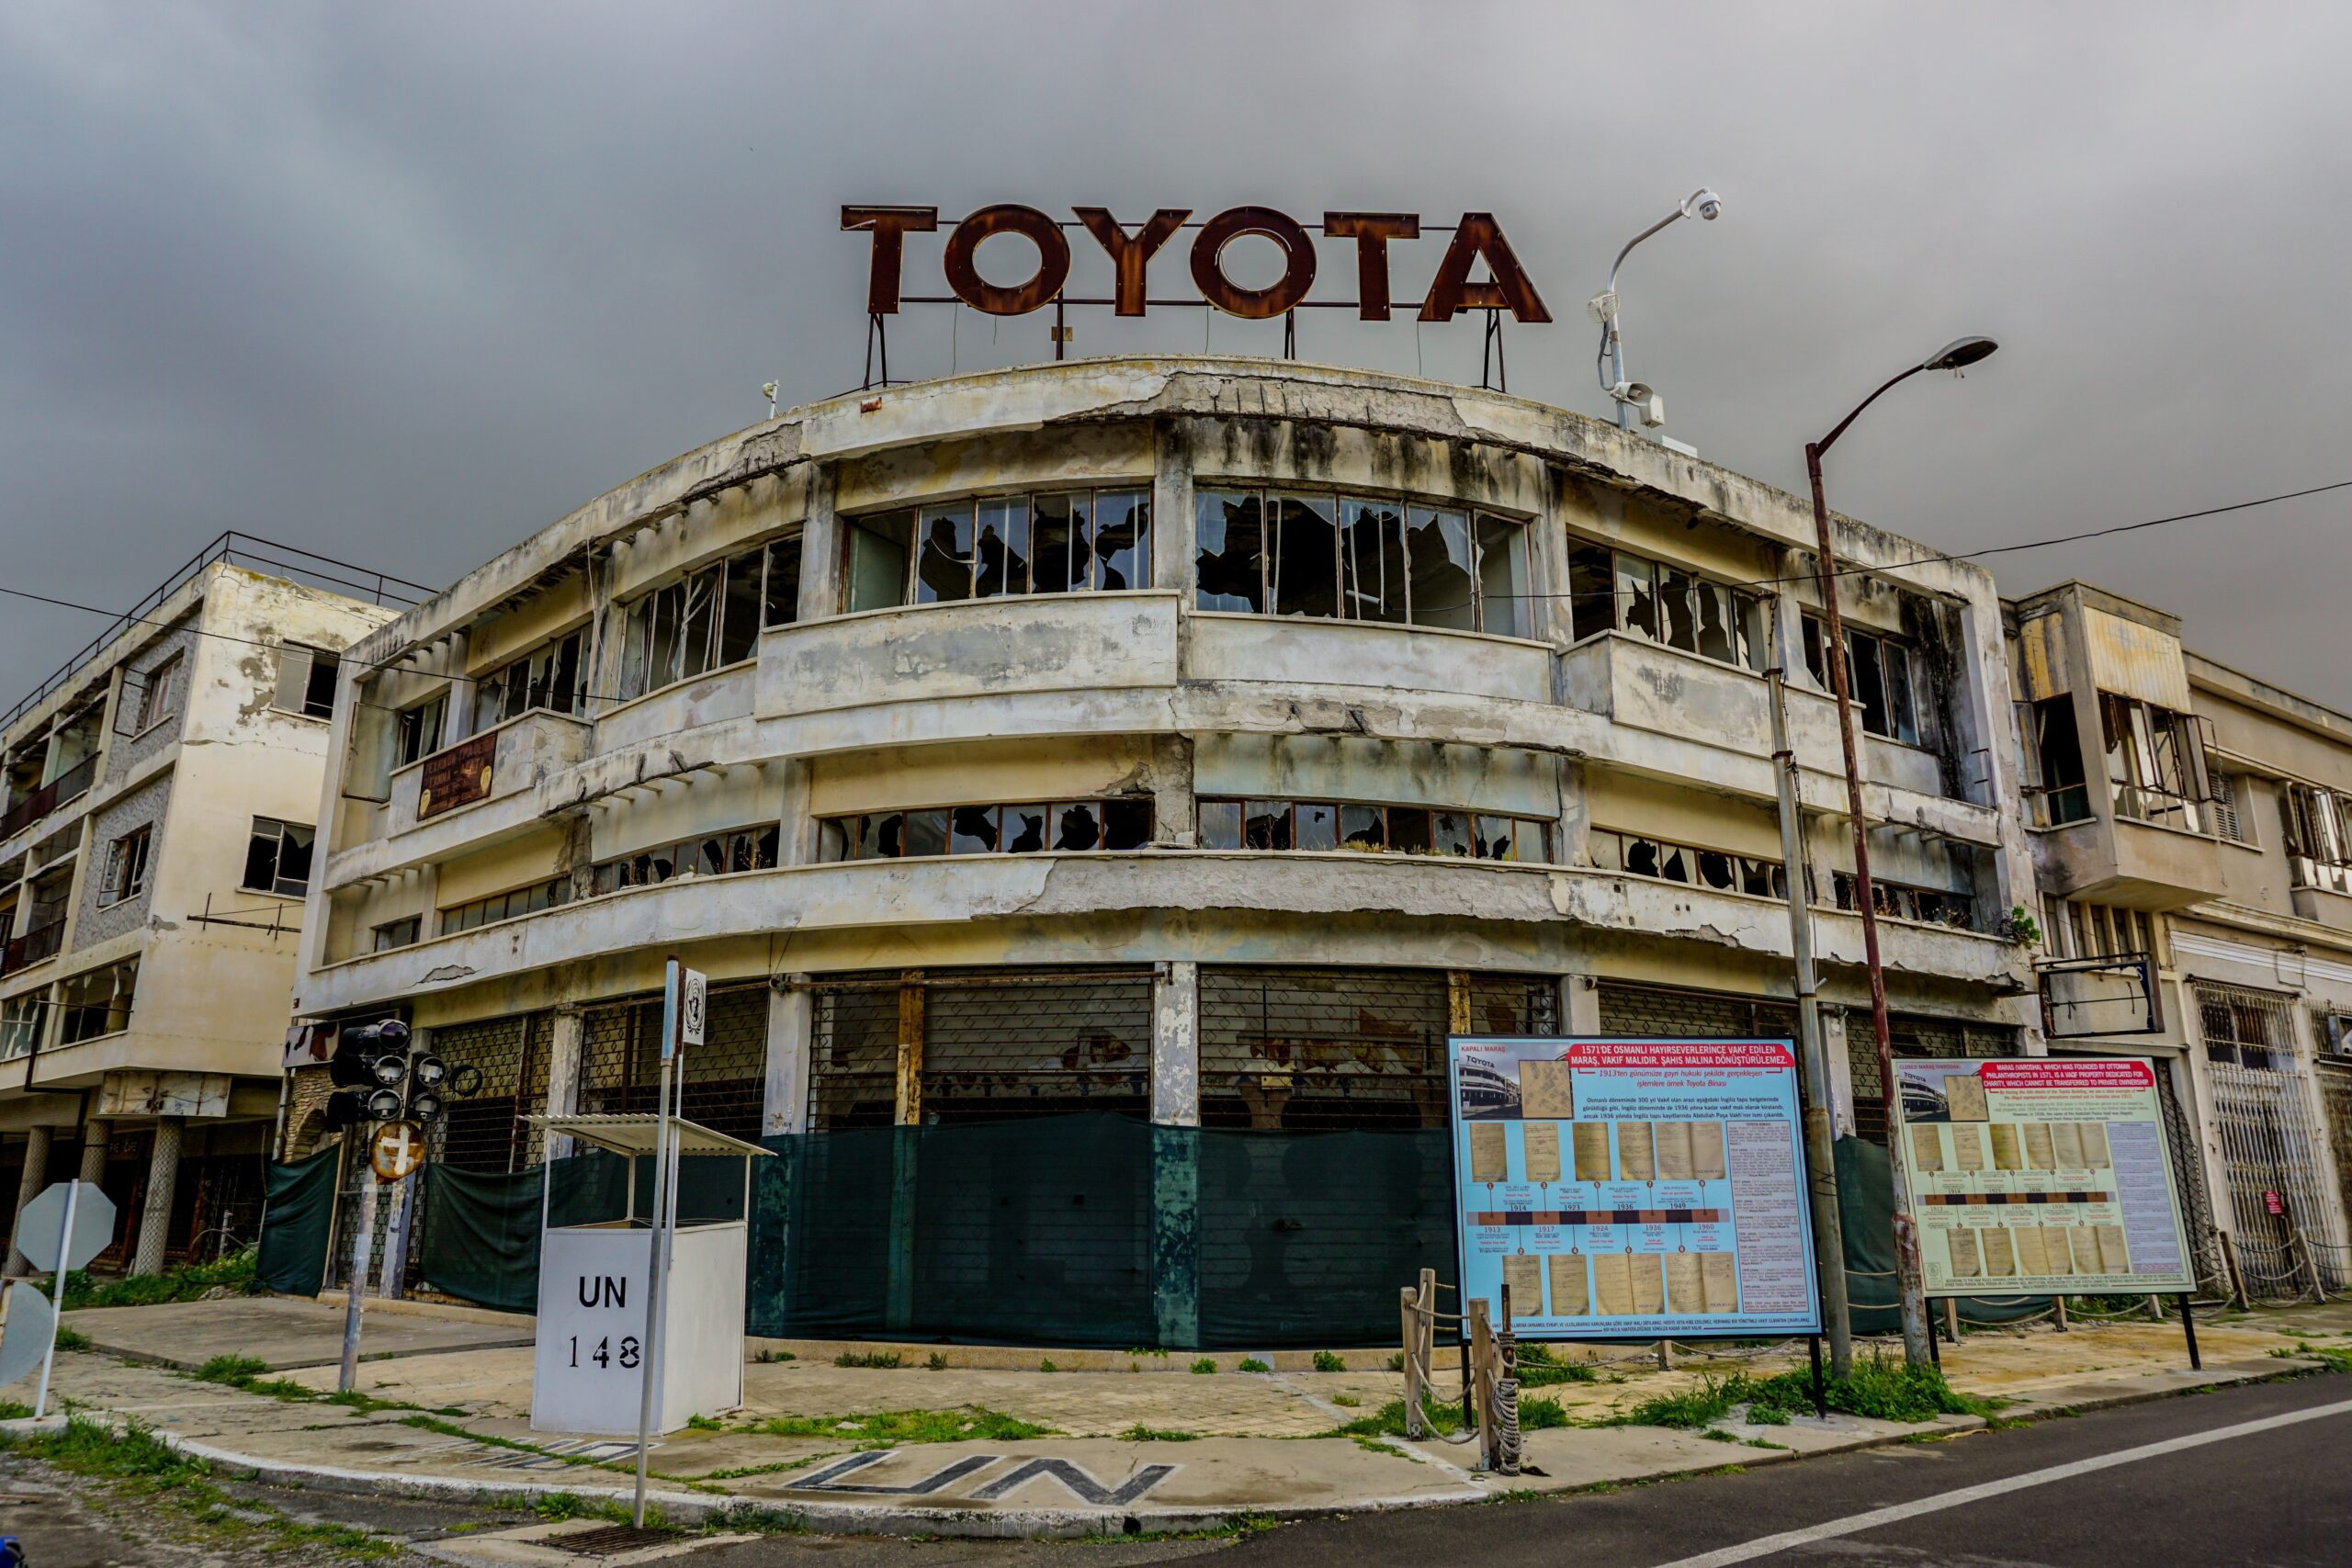 Abandoned and destroyed Toyota showroom in Varosha, Cyprus, aftermath of the 1974 Turkish invasion.